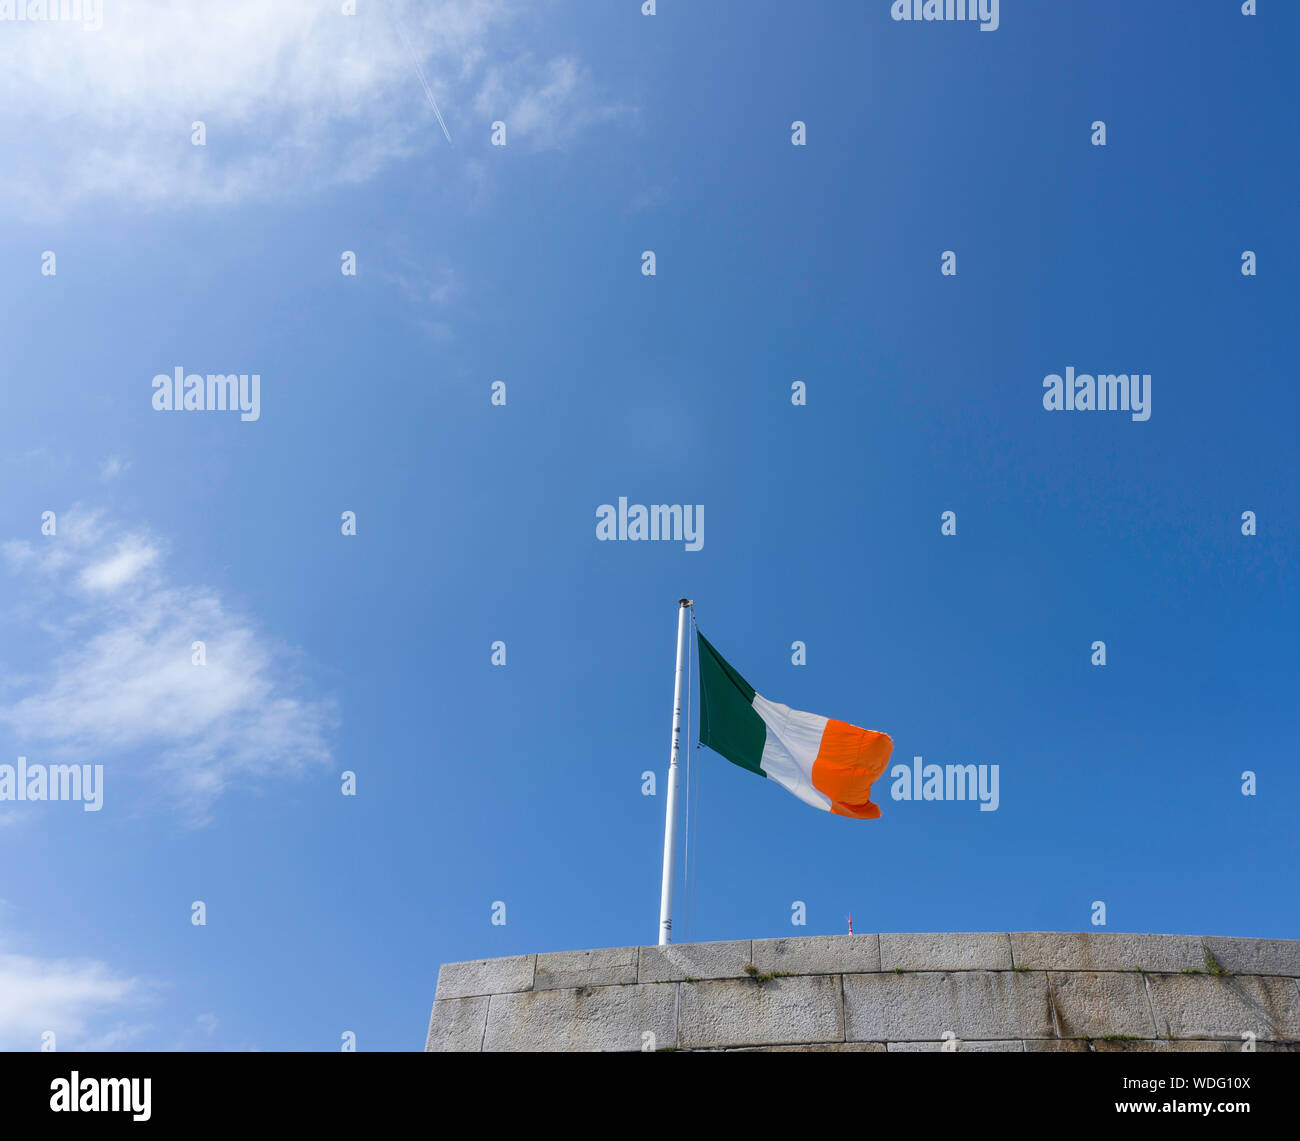 The tricolour flag of the Irish Republic flying from a building in Dun Laoghaire. Stock Photo